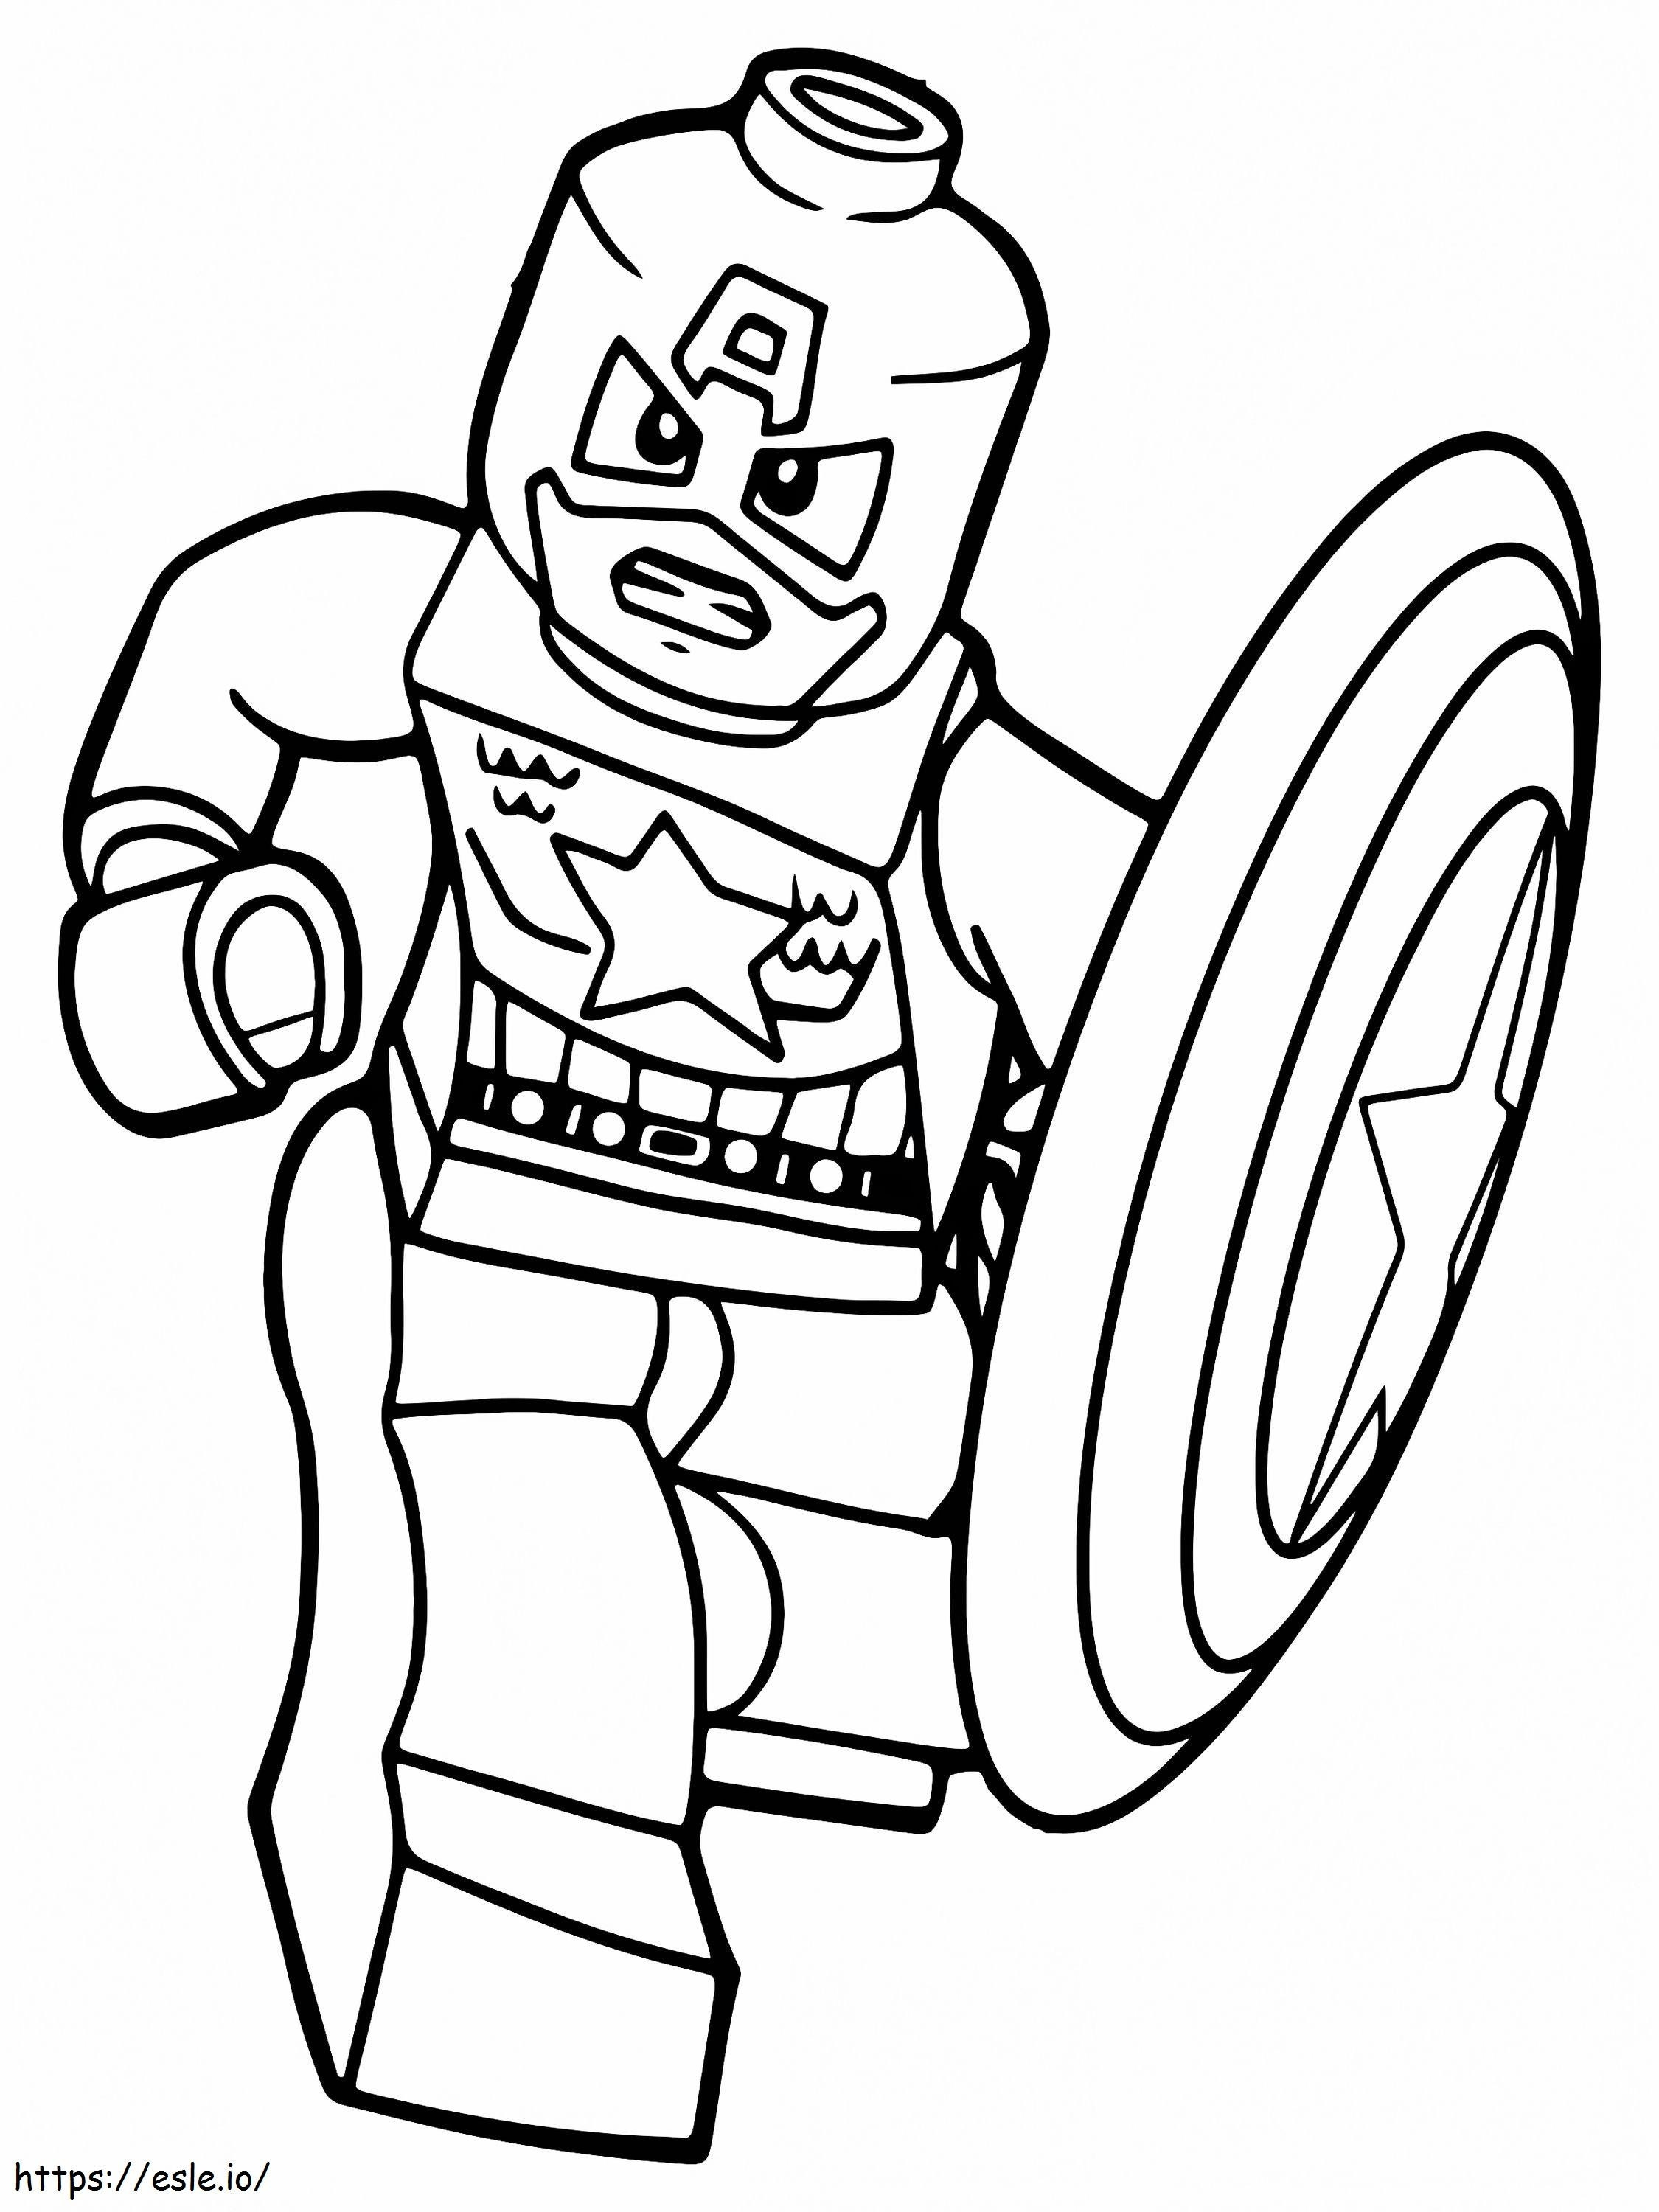 Prepared Captain America Lego Avengers coloring page